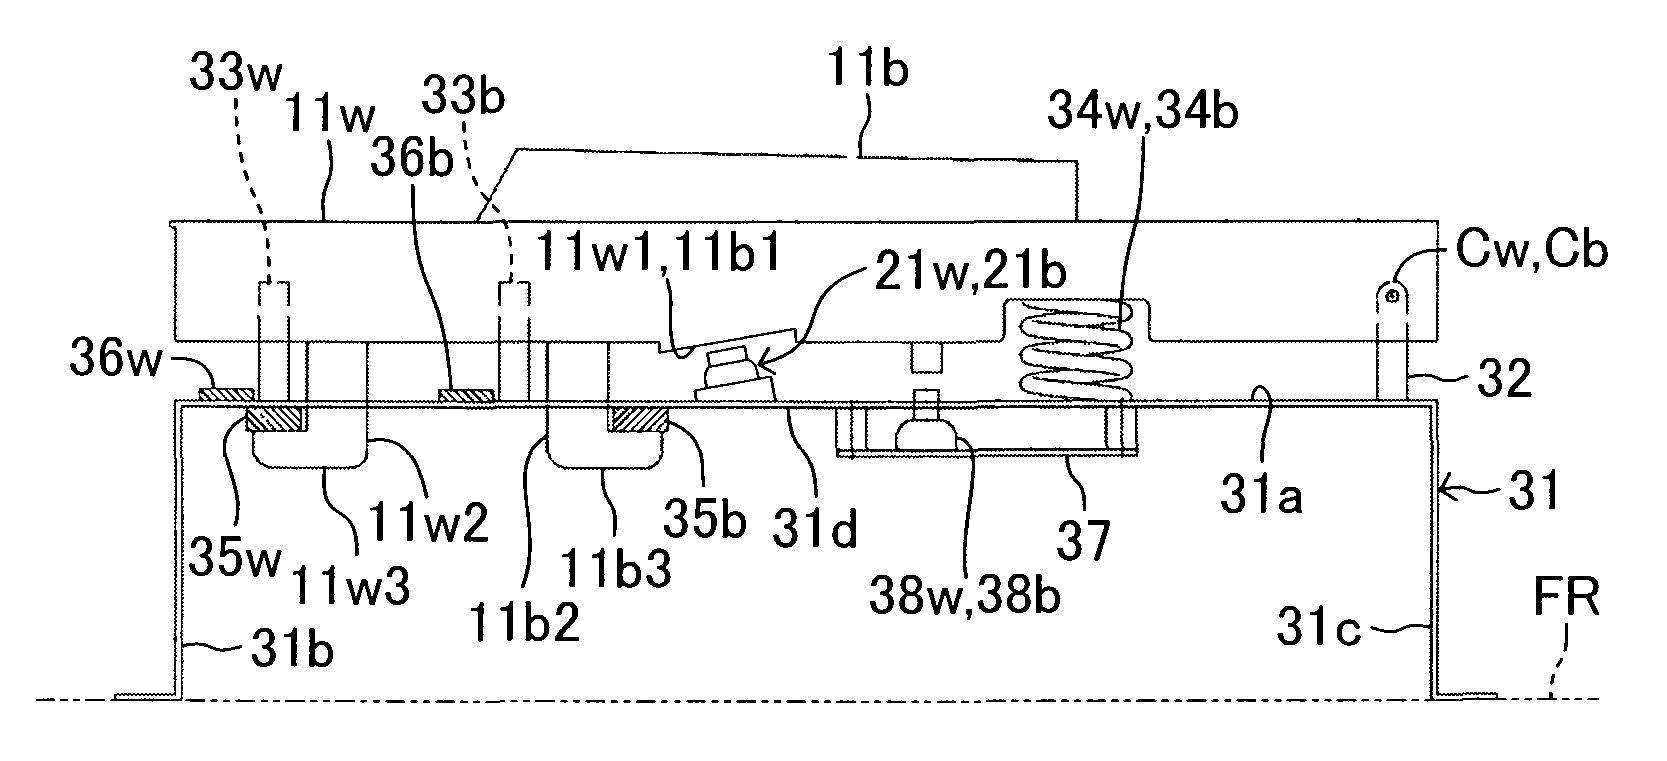 Keyboard apparatus for an electronic musical instrument